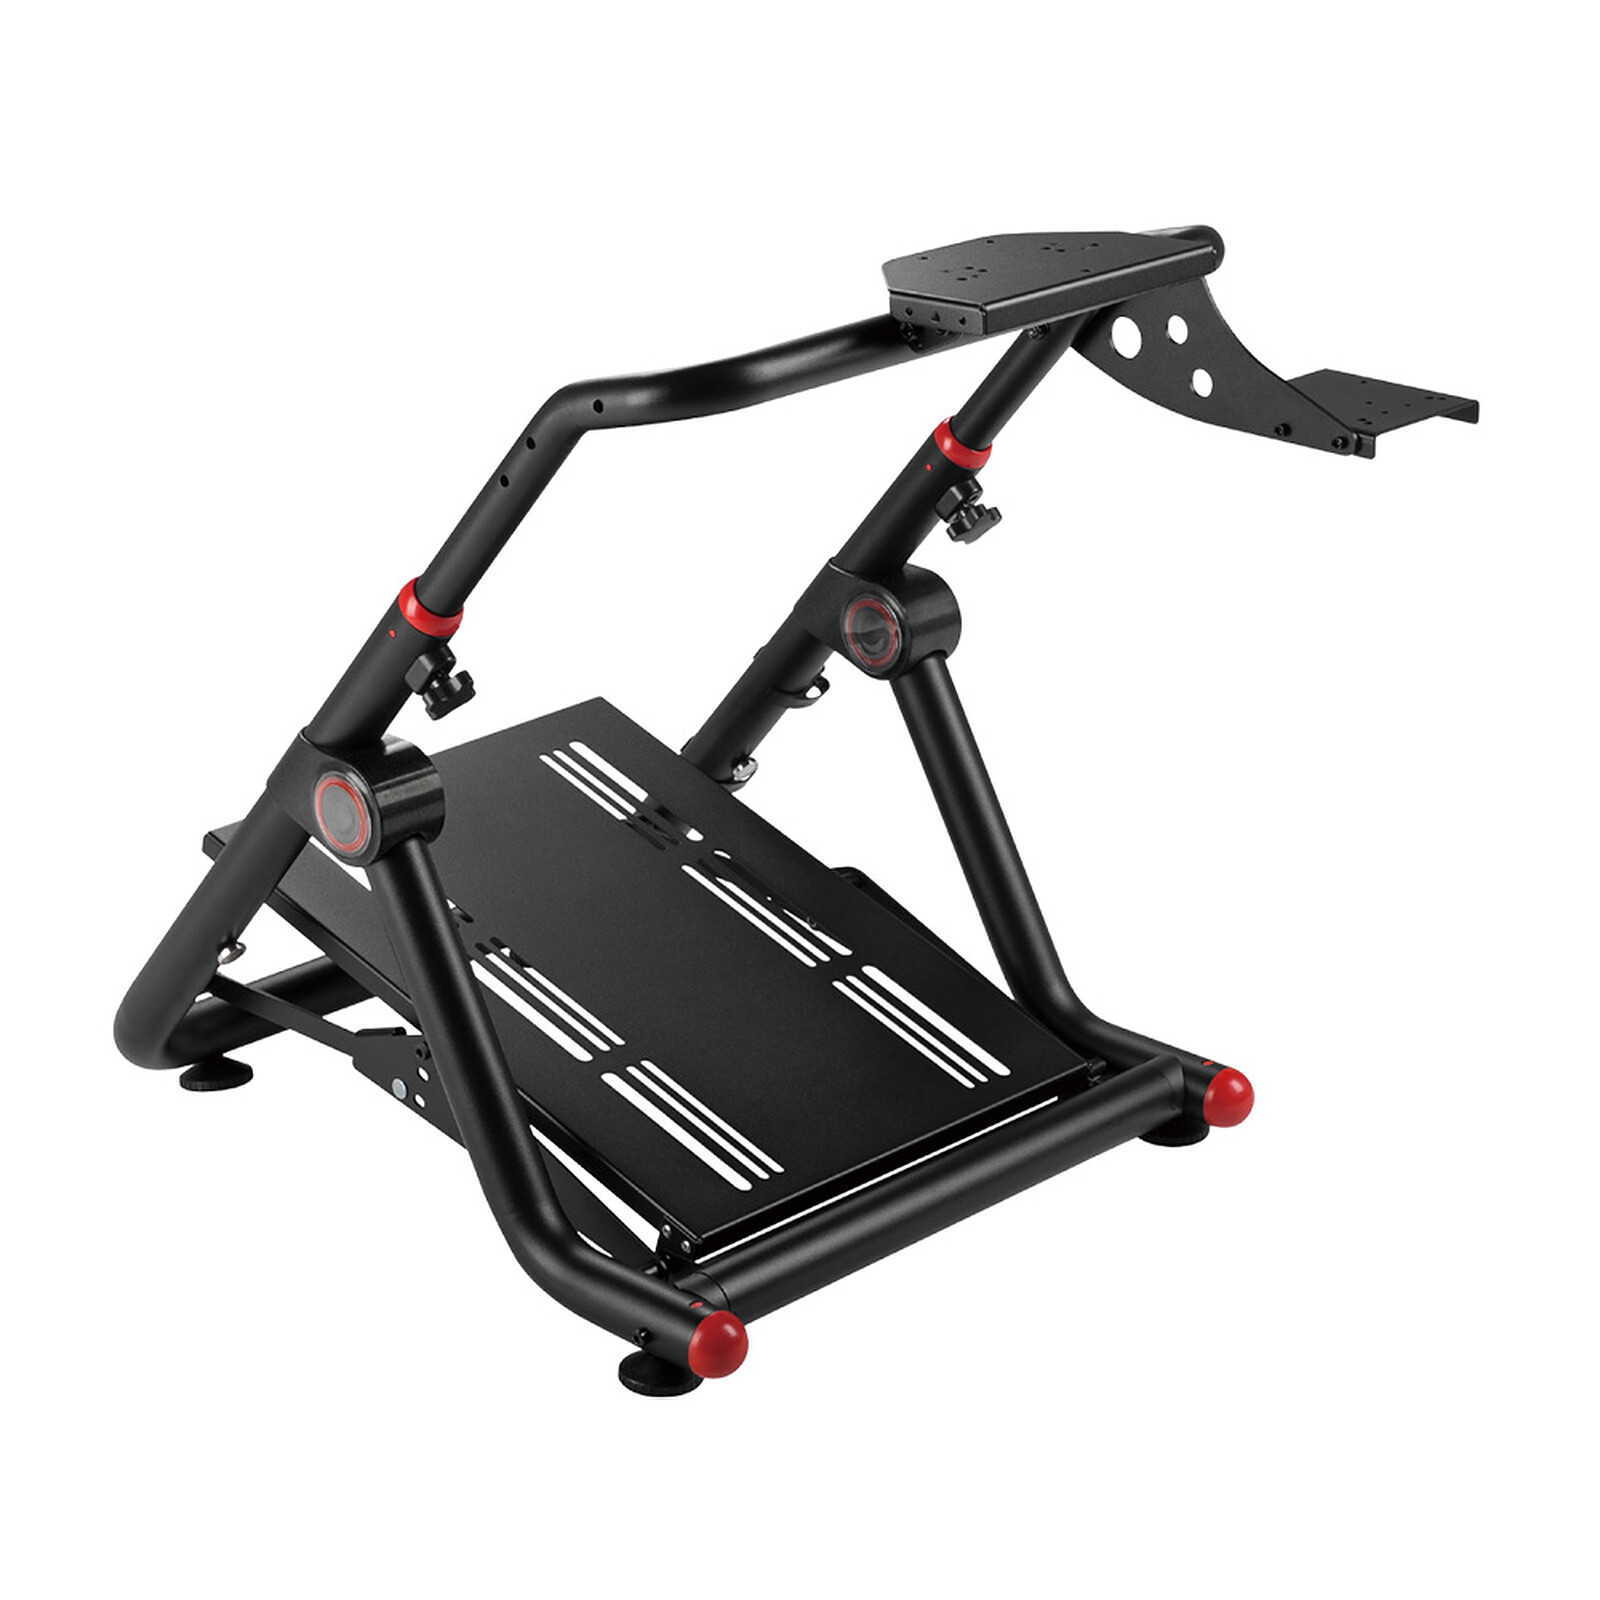 OPLITE Wheel Stand GTR - Other gaming accessories - LDLC 3-year warranty